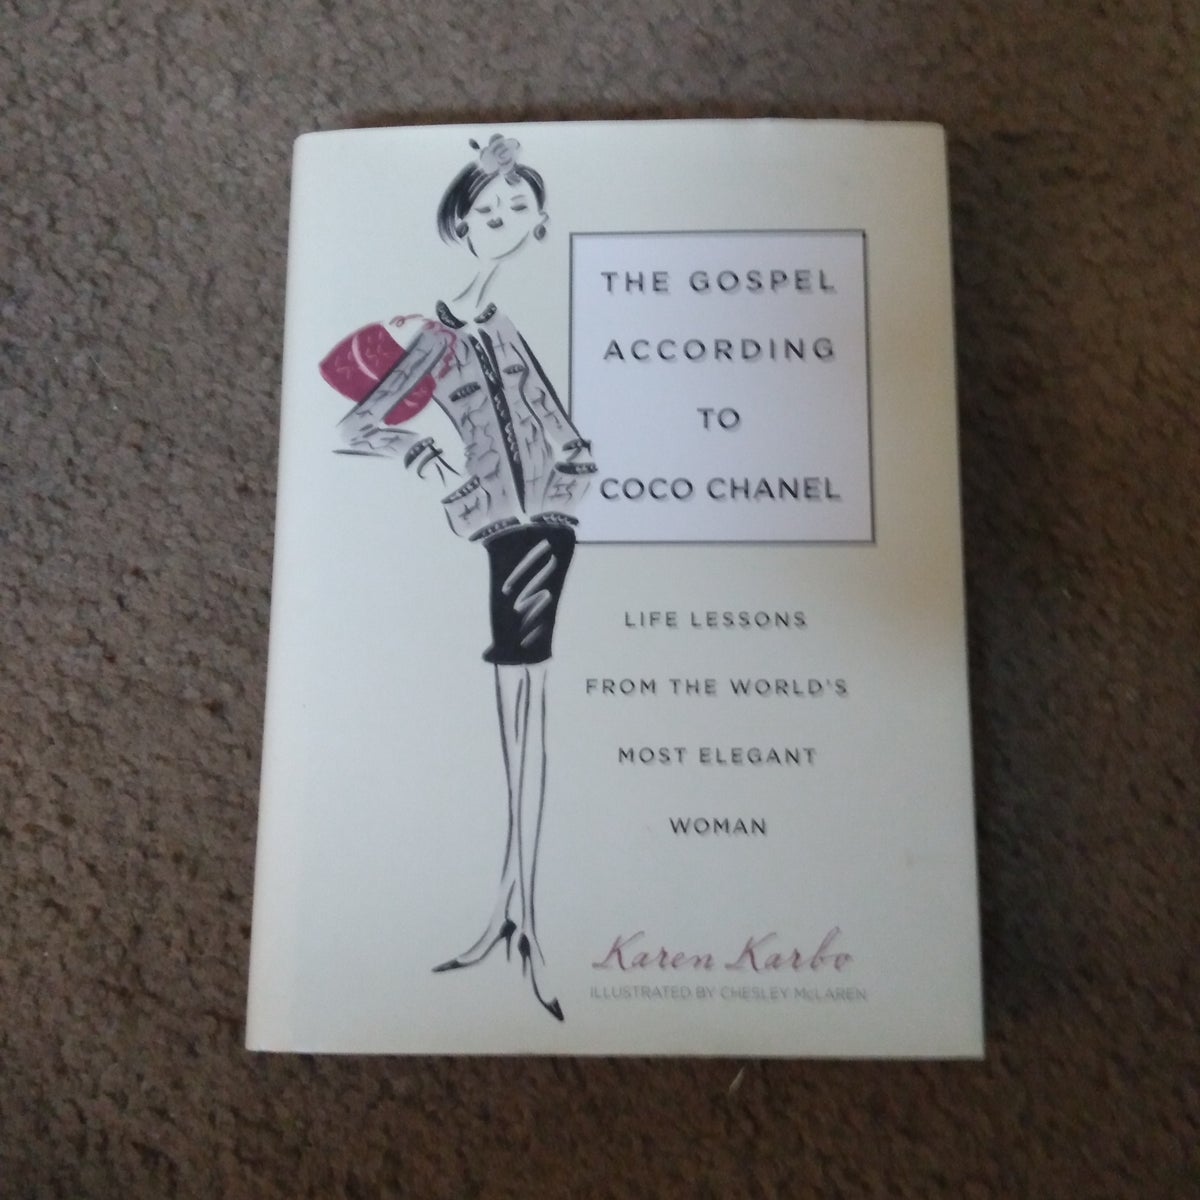 The Gospel According to Coco Chanel: Life Lessons from the World's Most Elegant Woman [Book]